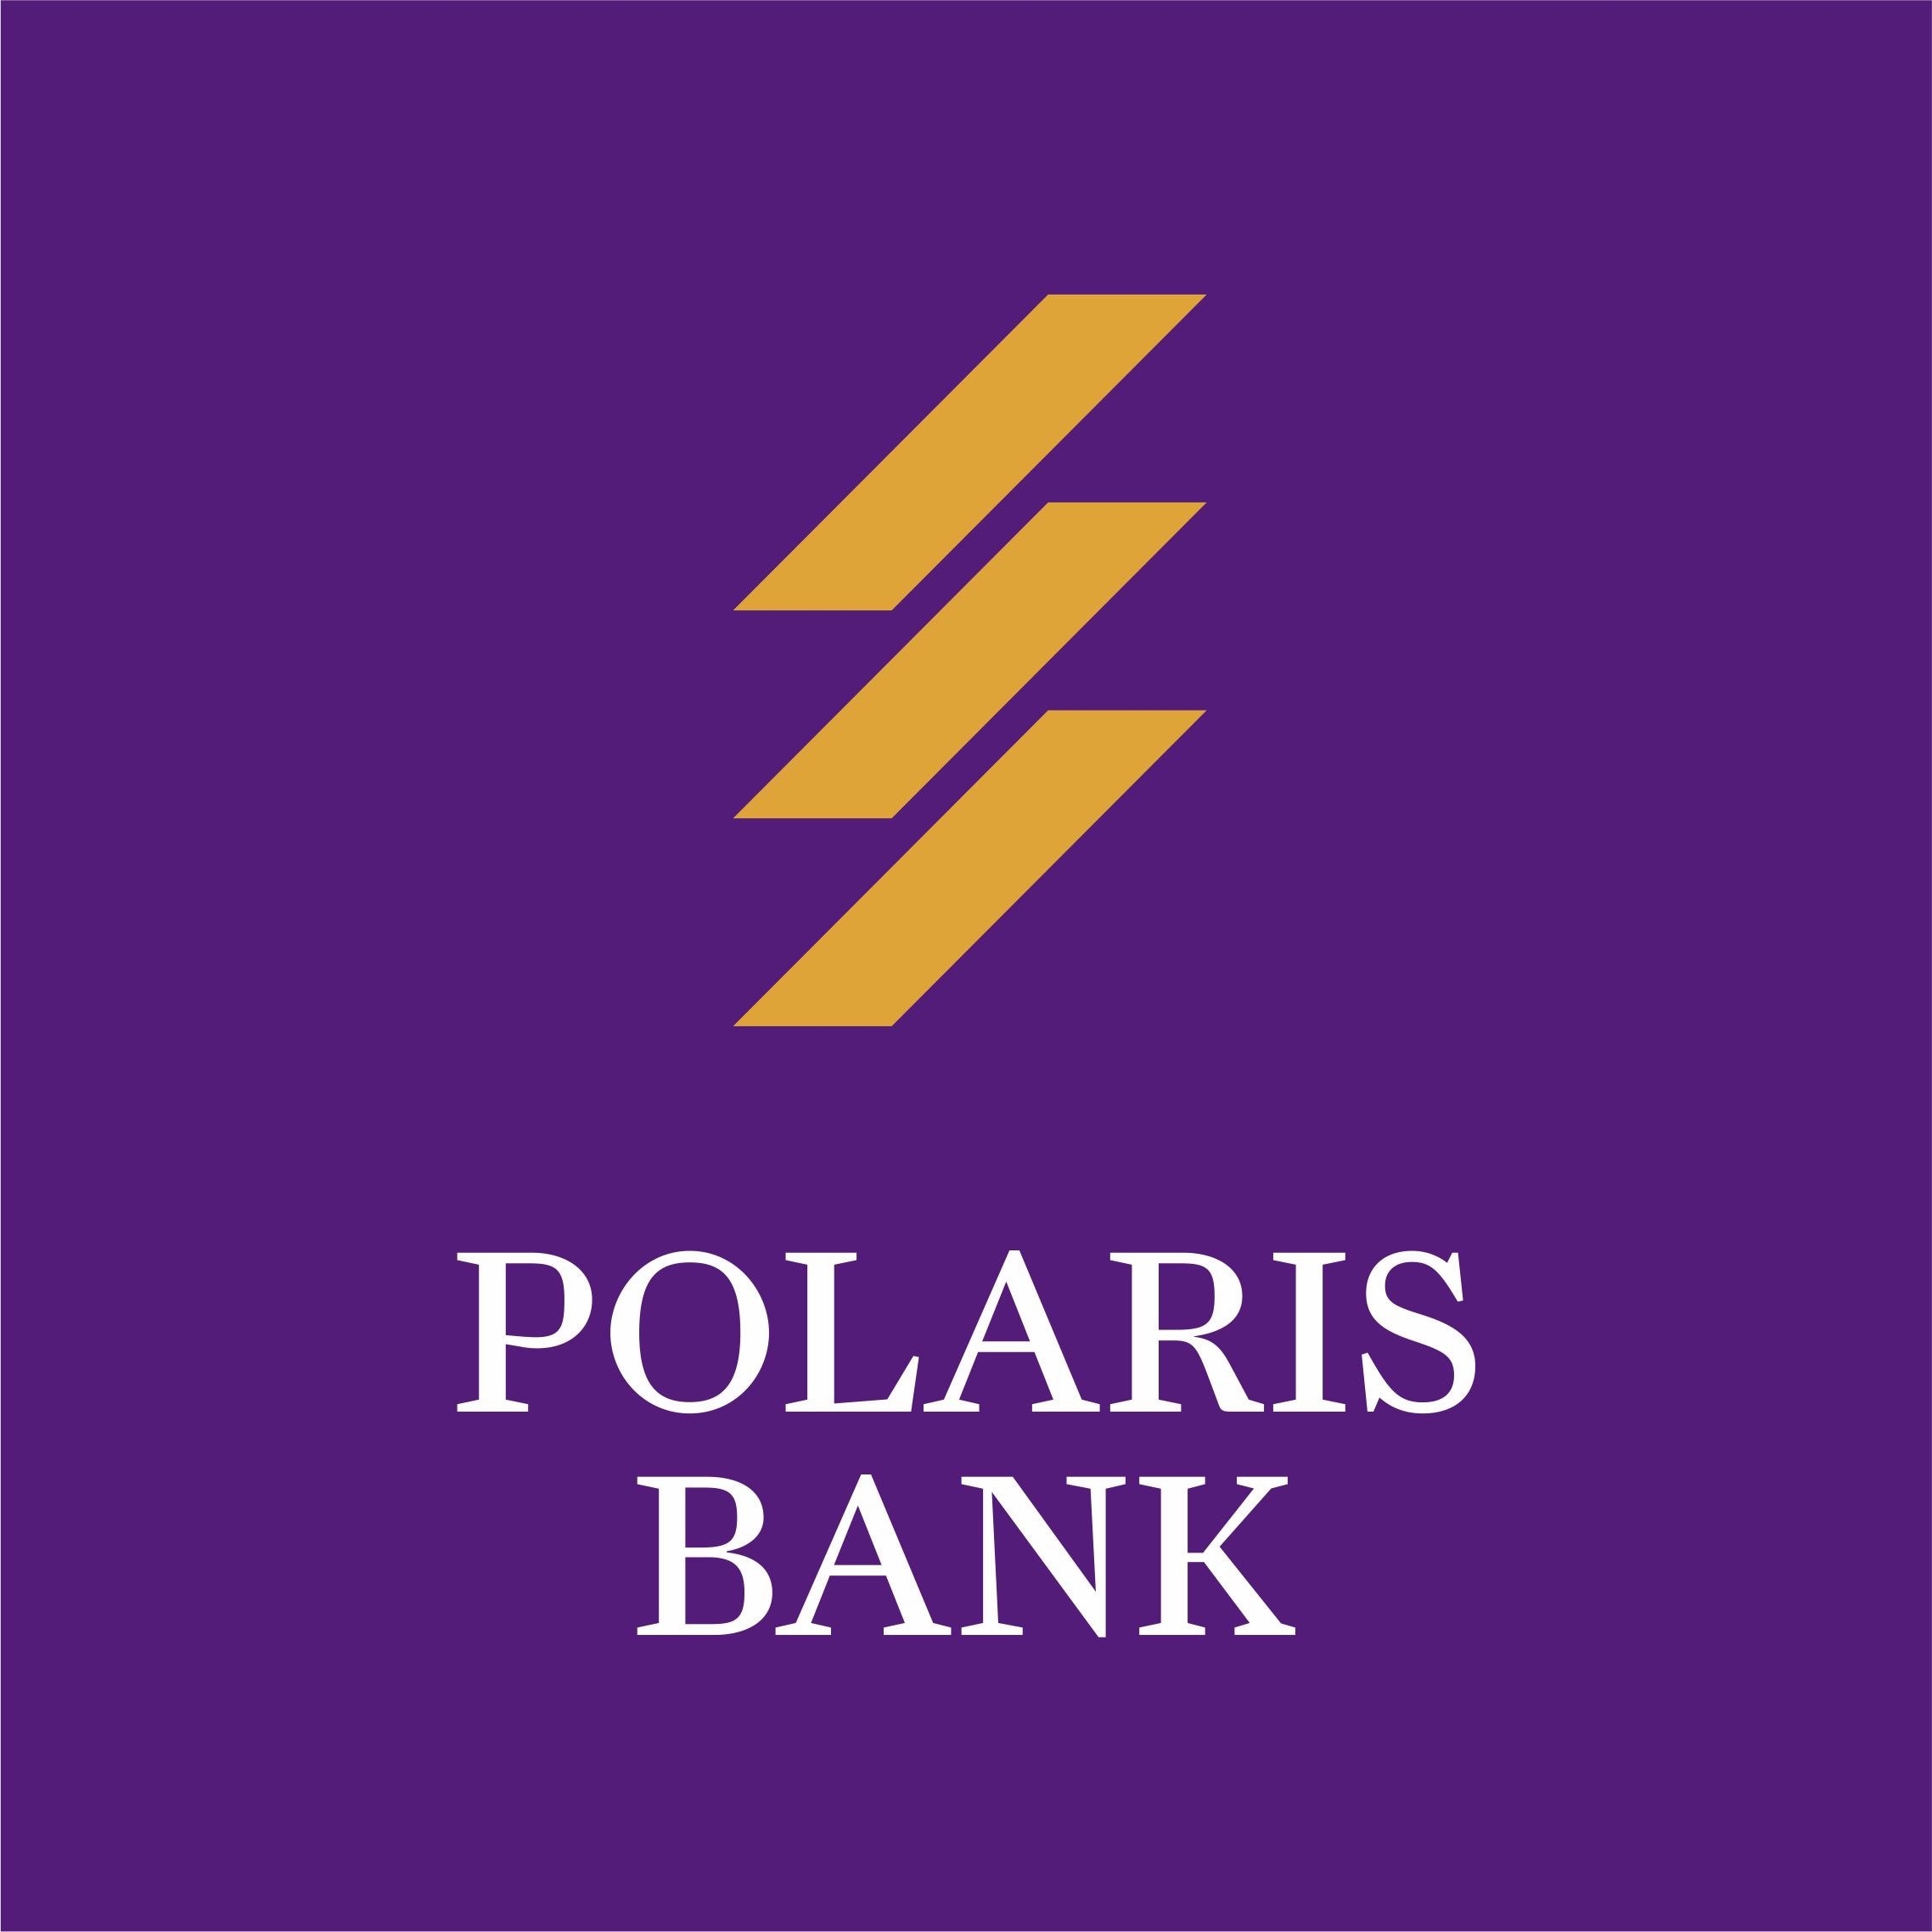 Polaris Bank Affirms Transparency in Bank's Acquisition Process in a Leaked Email